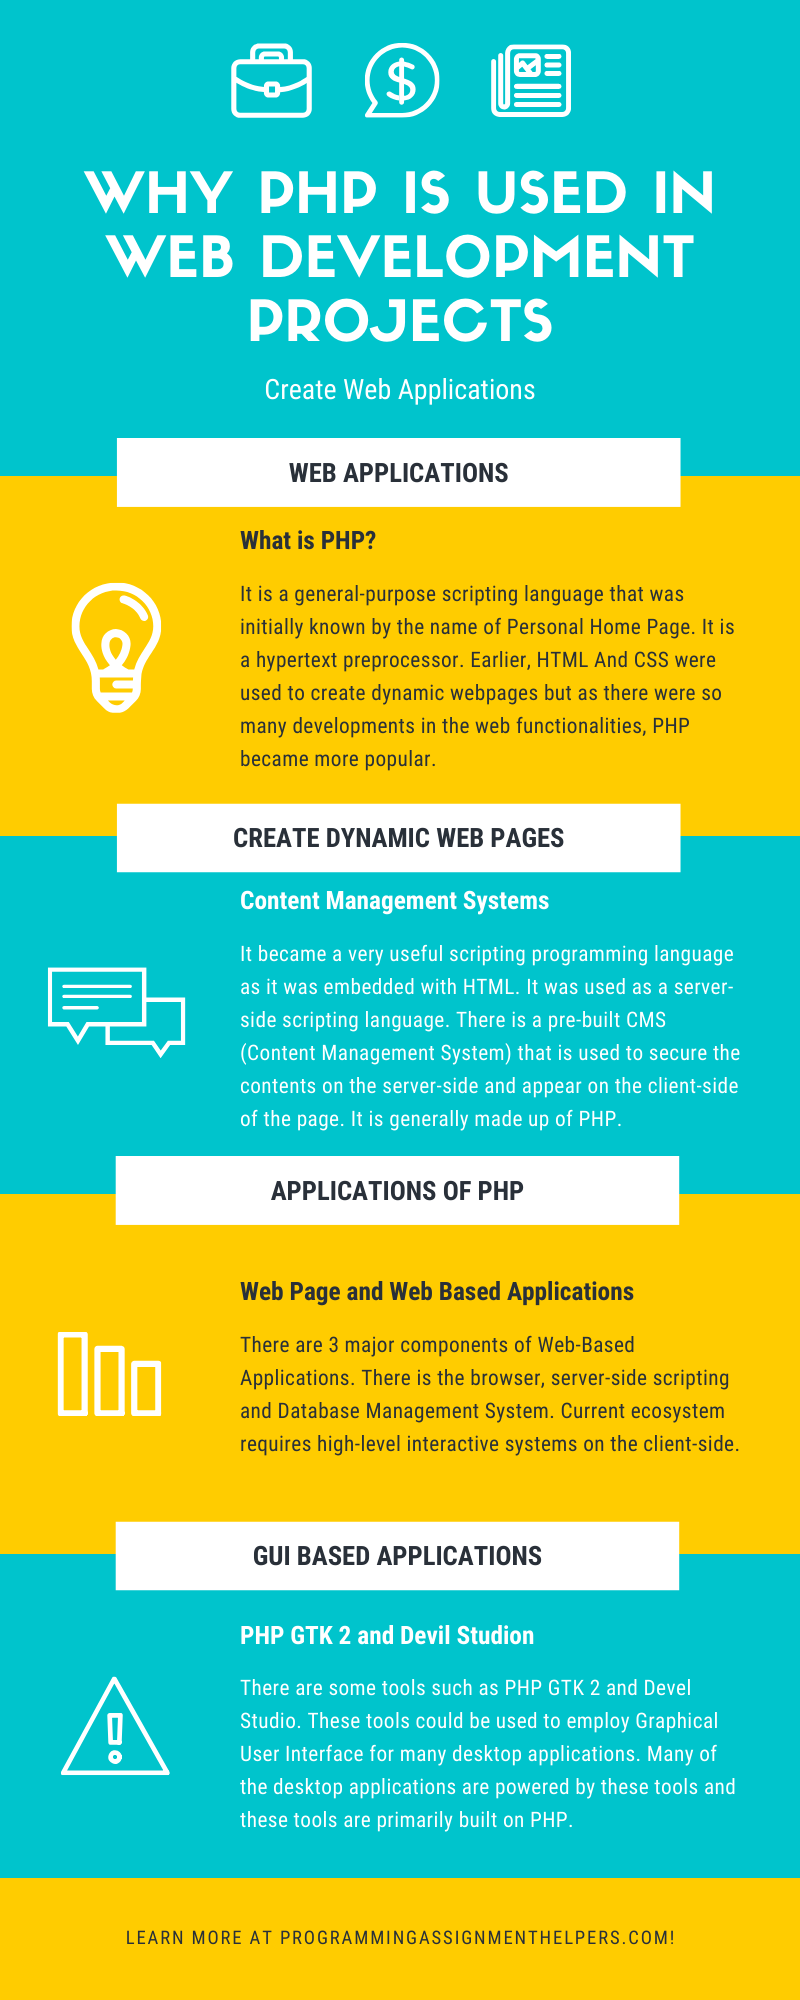 Applications Of PHP